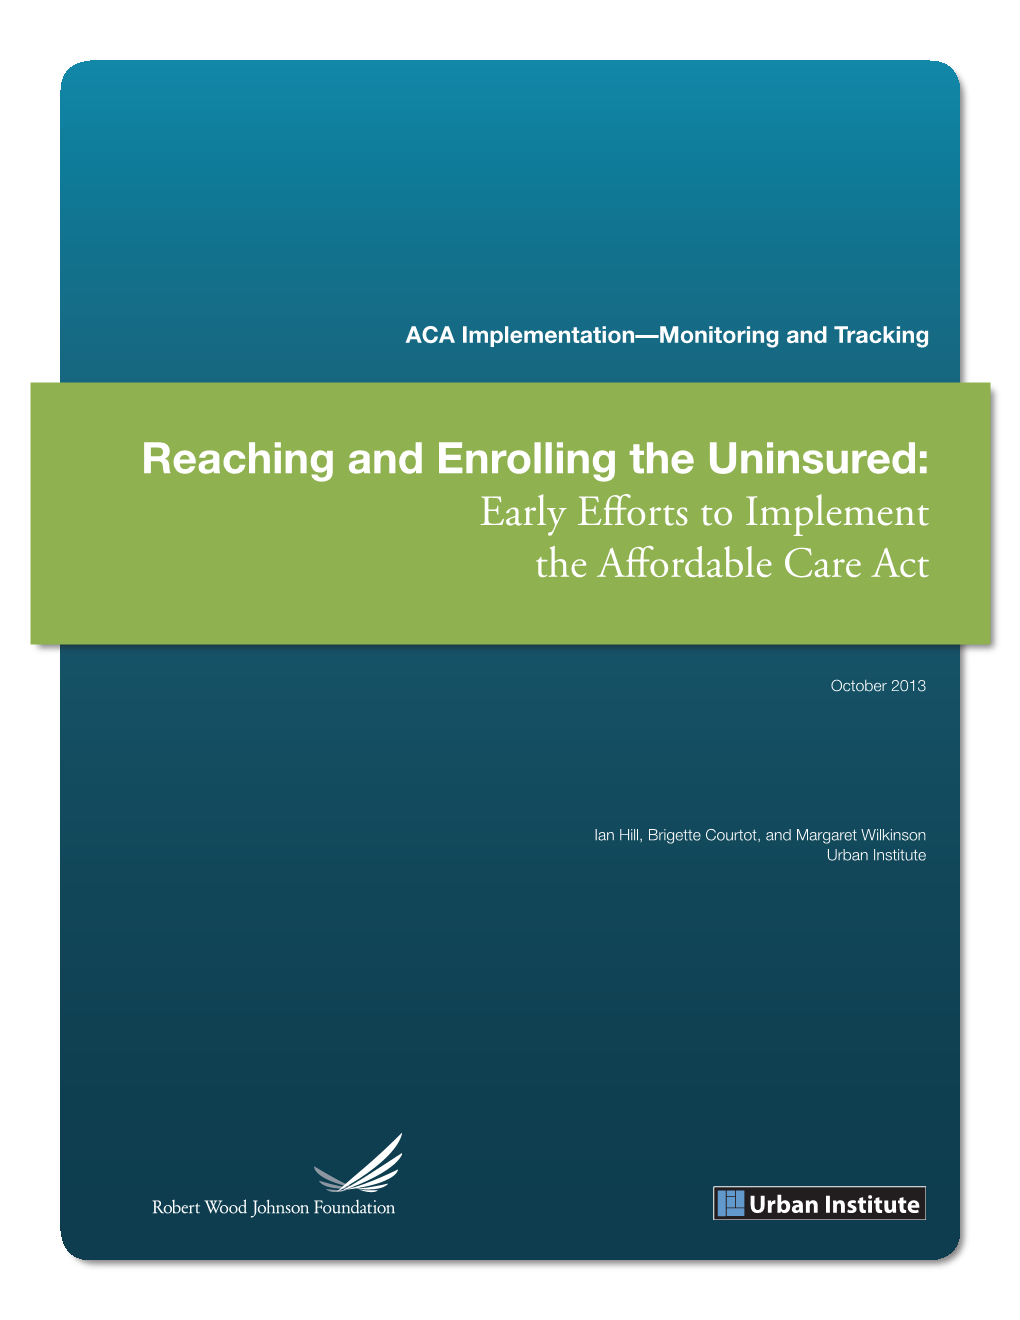 Reaching and Enrolling the Uninsured: Early Efforts to Implement the Affordable Care Act